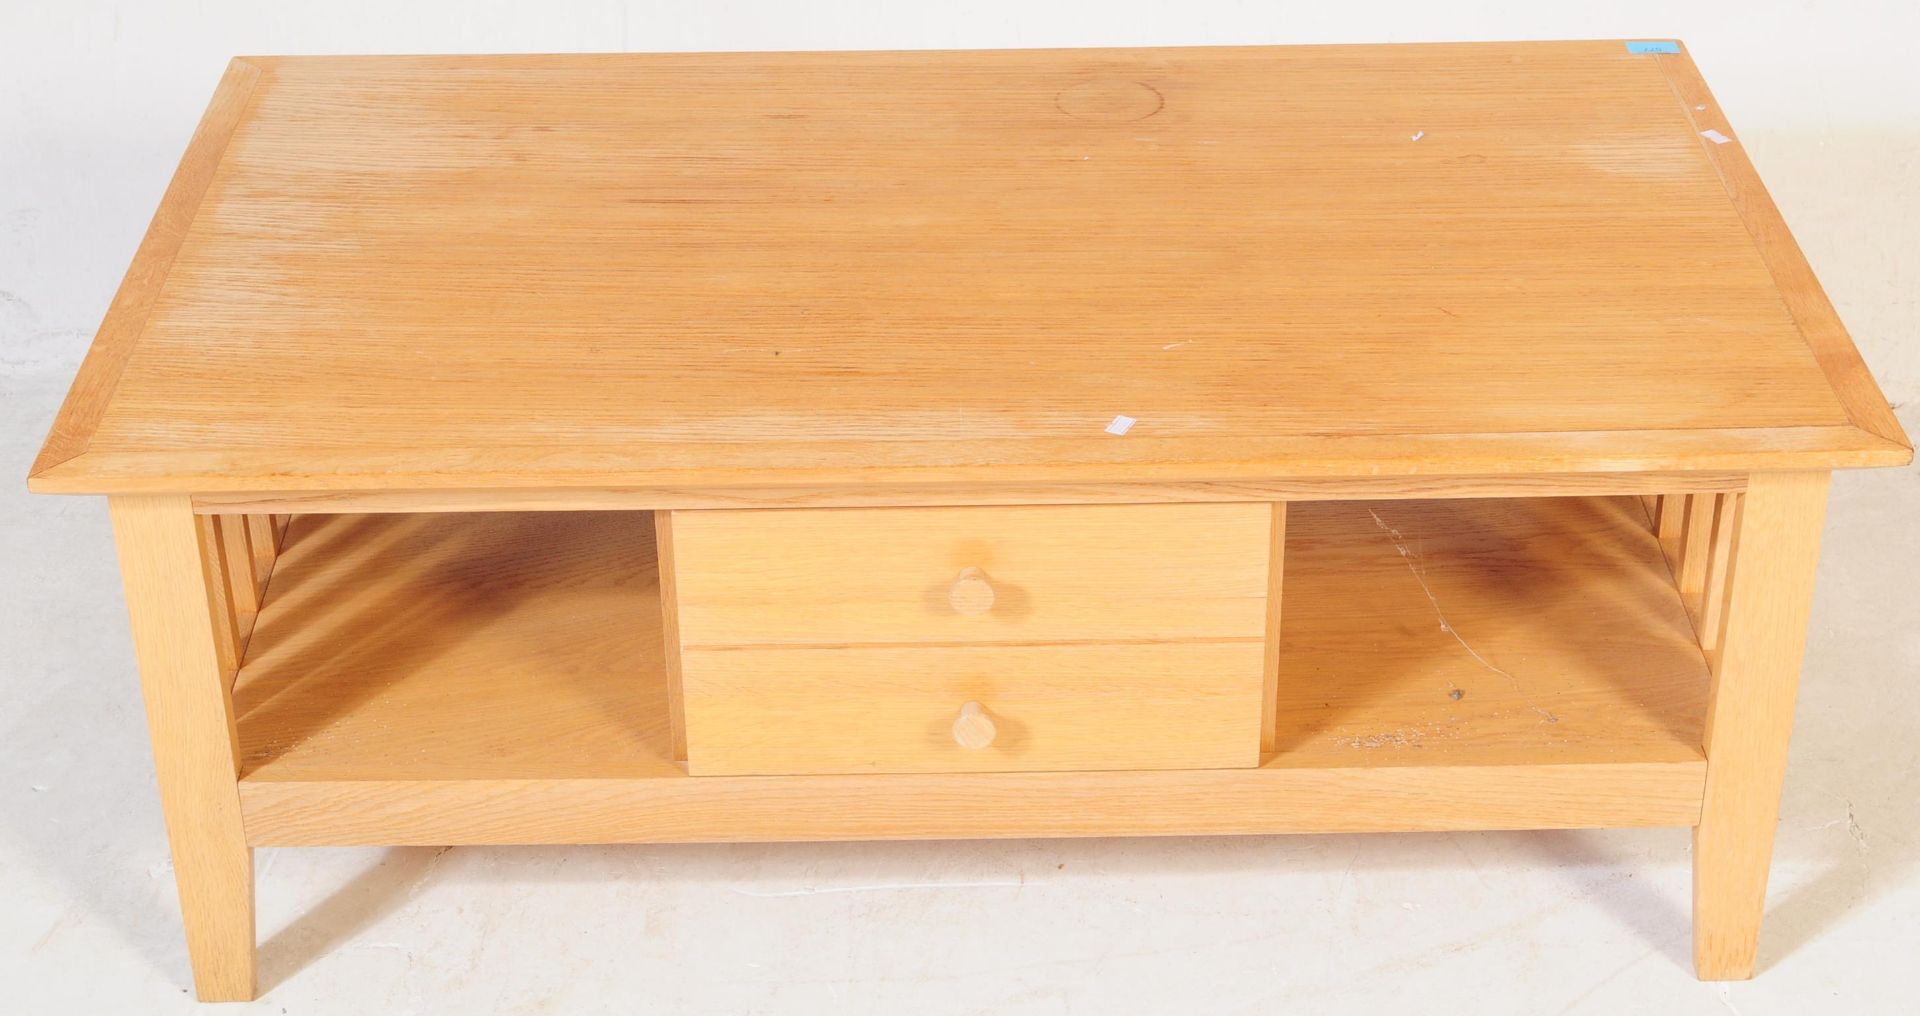 CONTEMPORARY OAK FURNITURE LAND STYLE COFFEE TABLE - Image 4 of 5